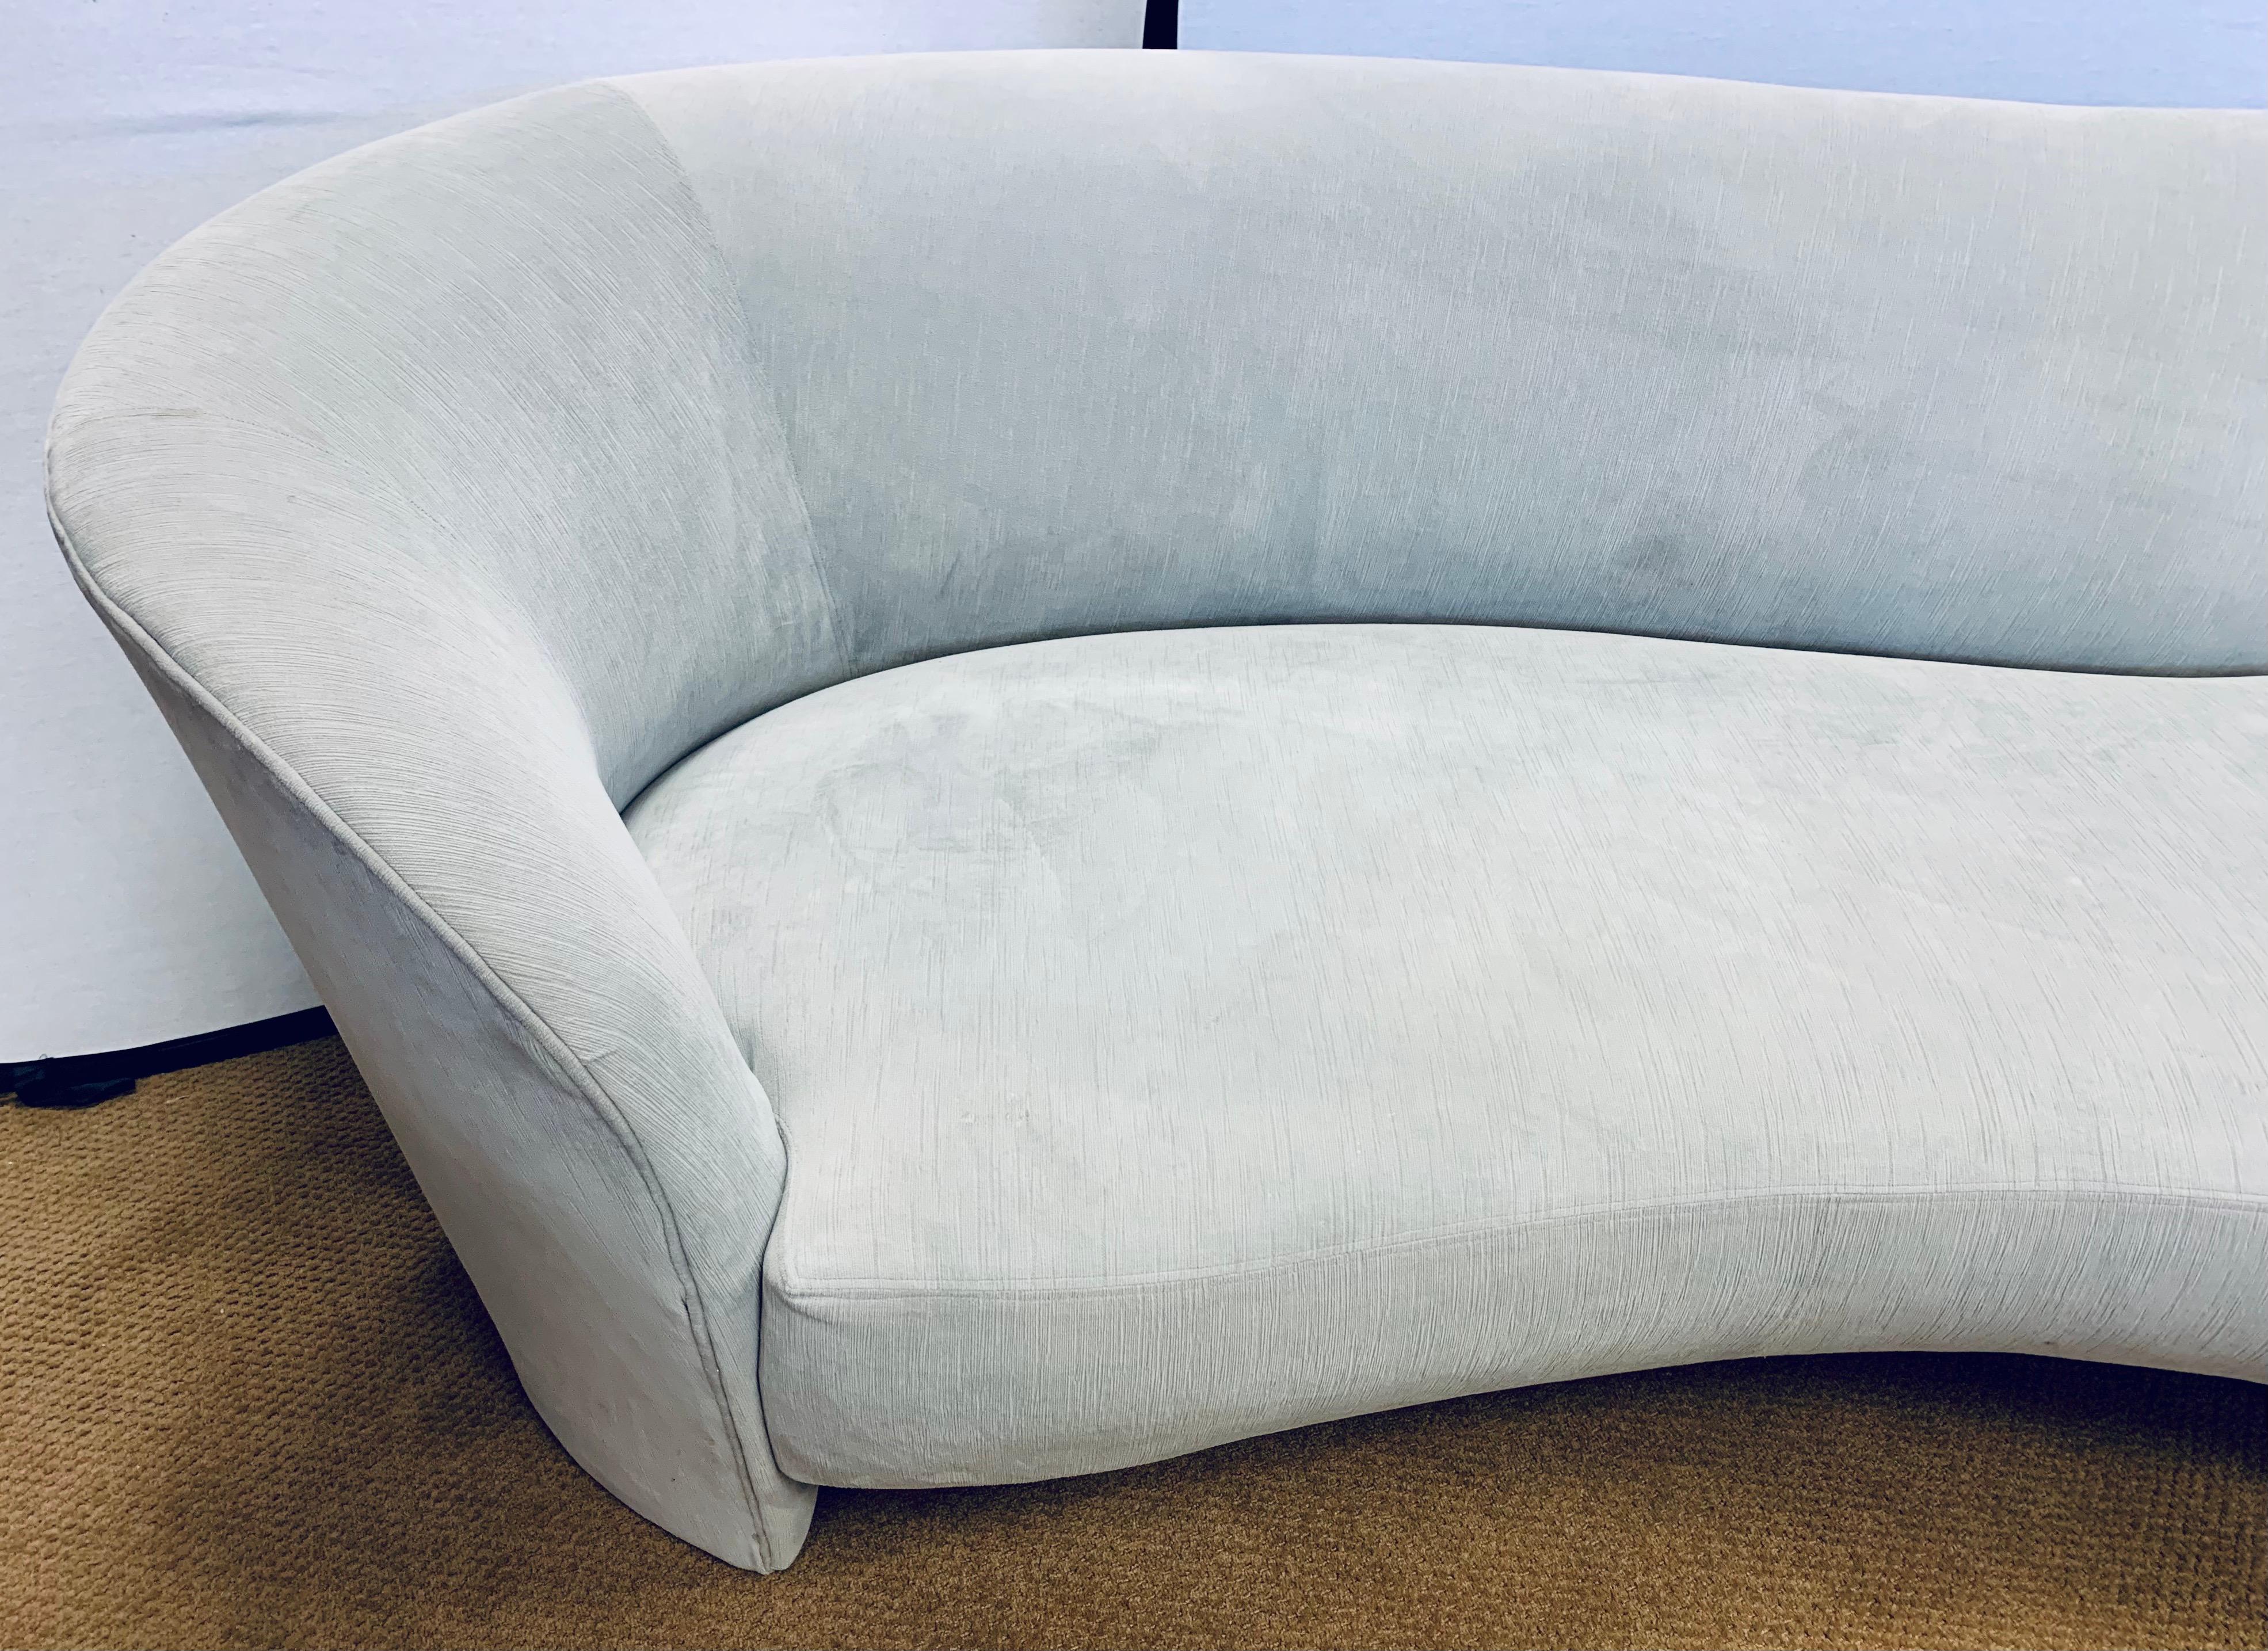 American Mid-Century Modern Sculptural Cloud Sofa for Directional Furniture